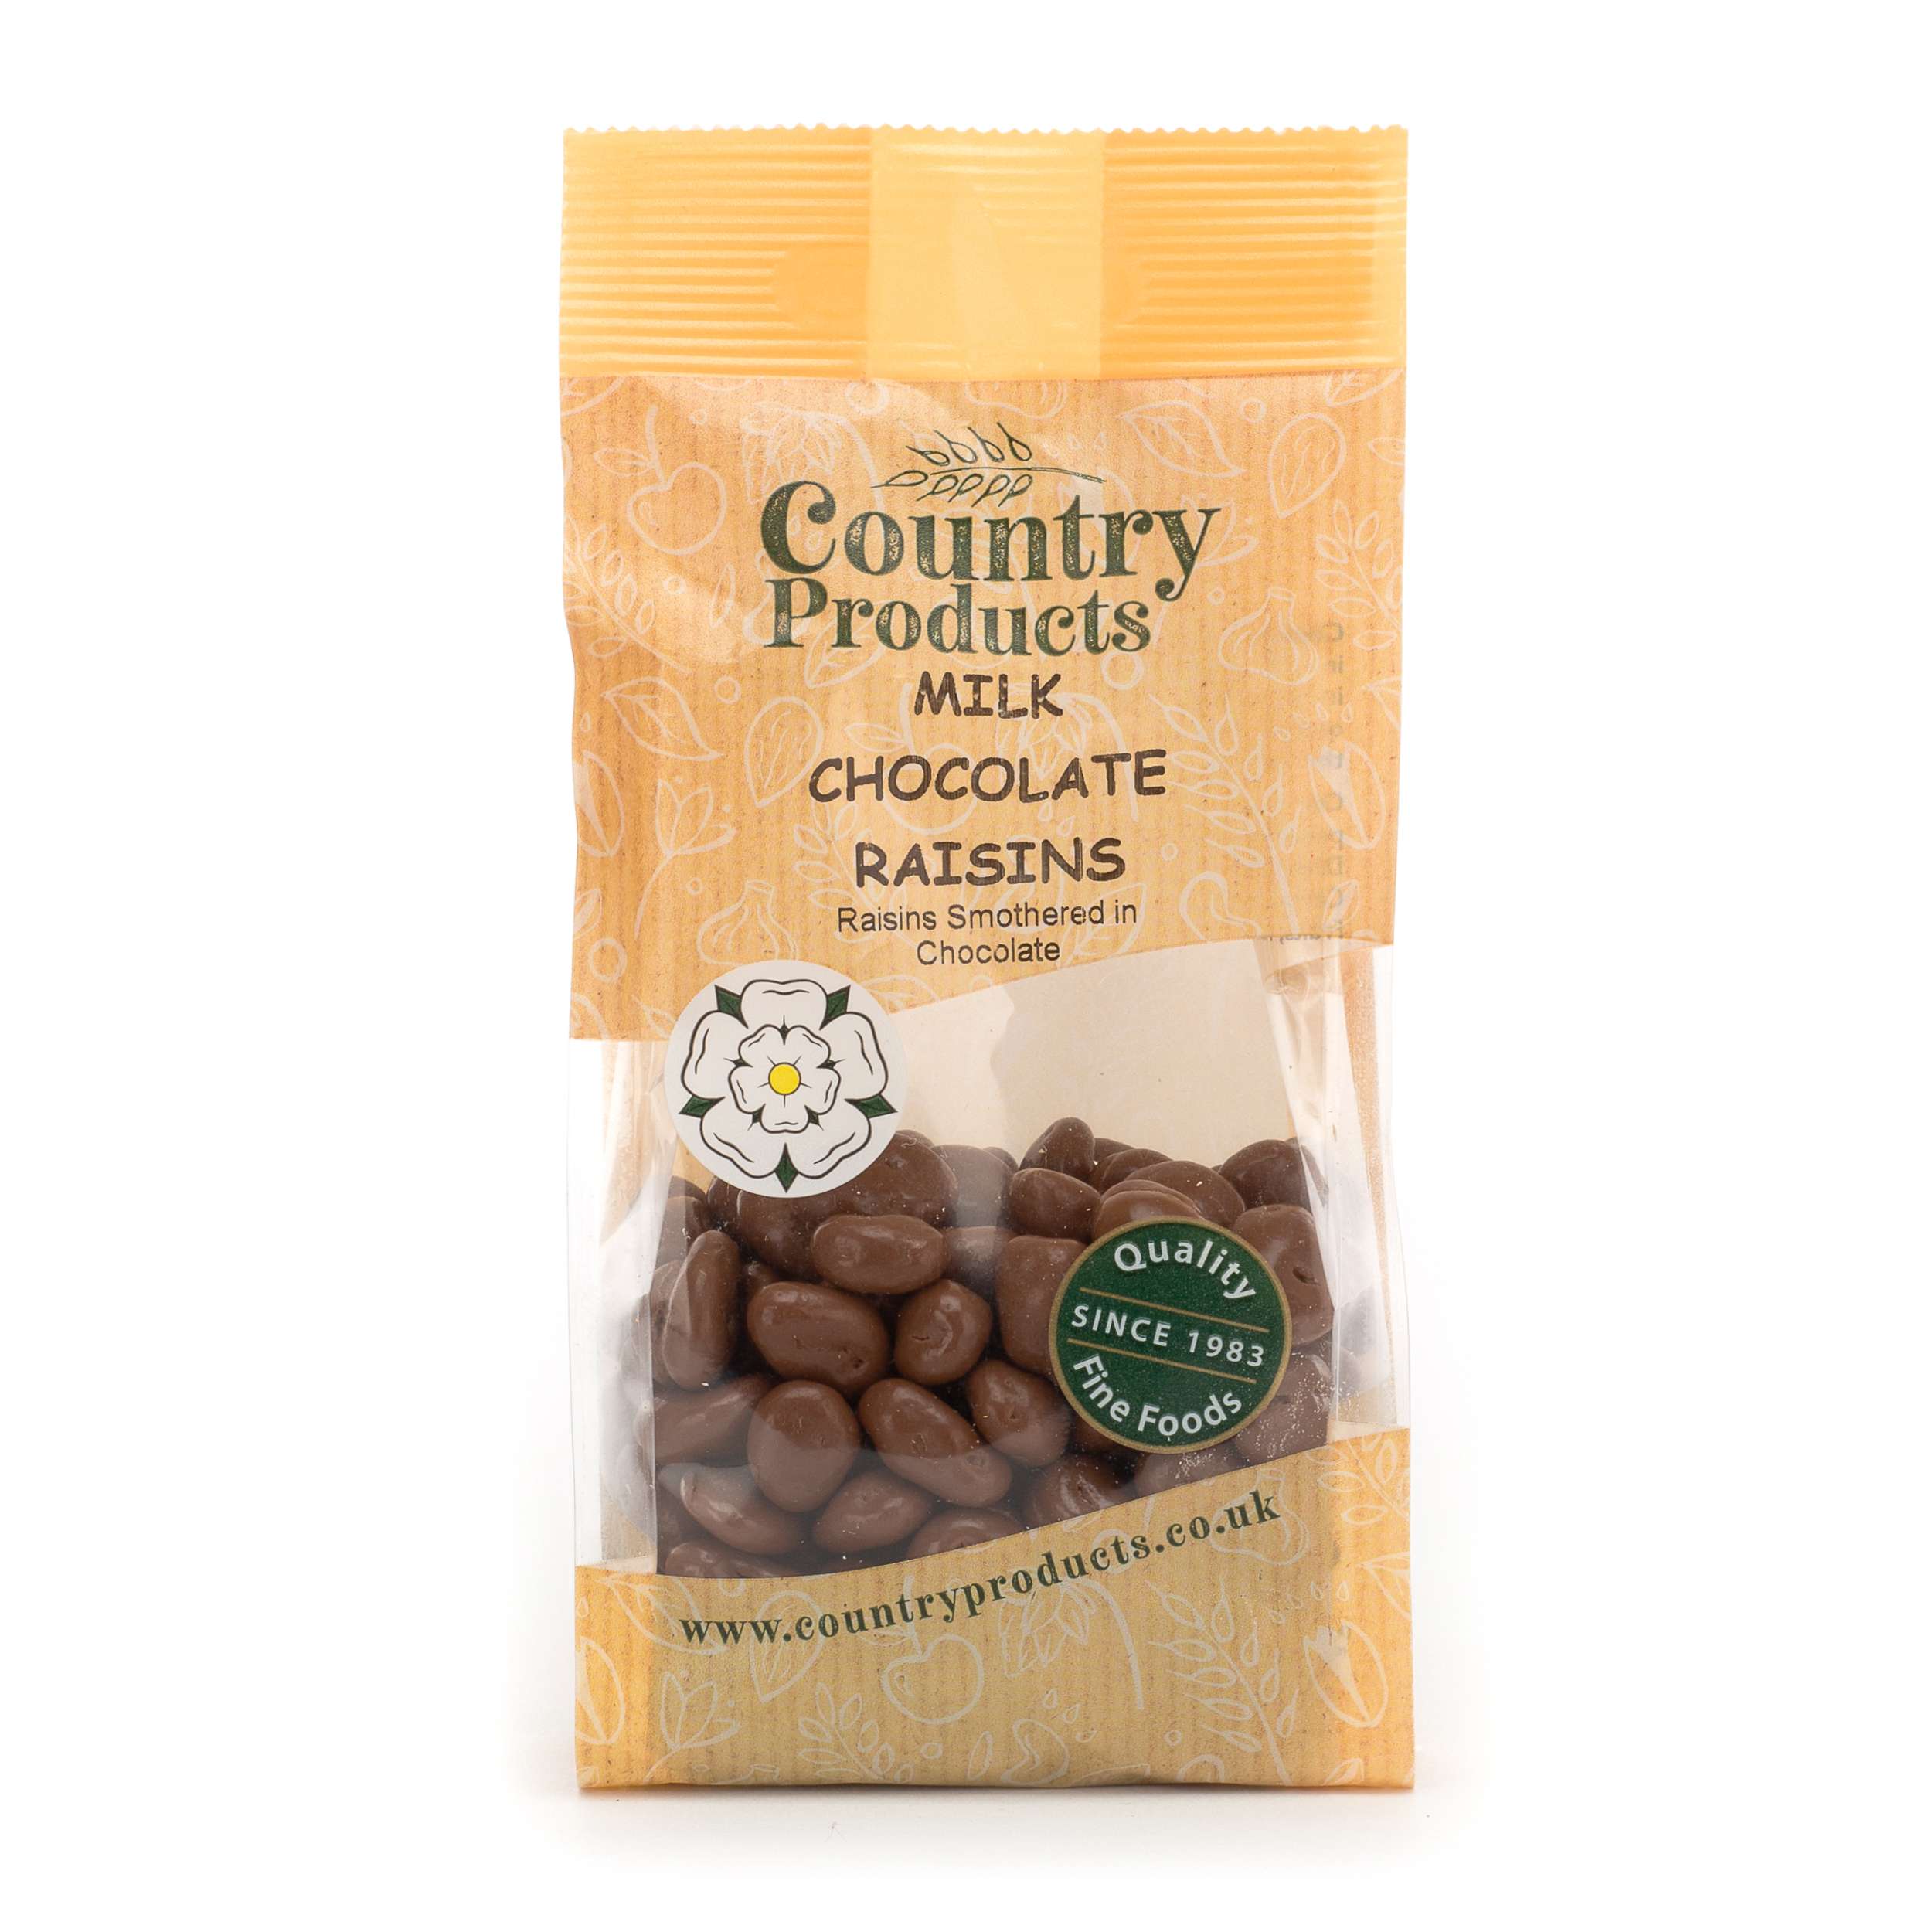 Country Products Milk Chocolate Raisins